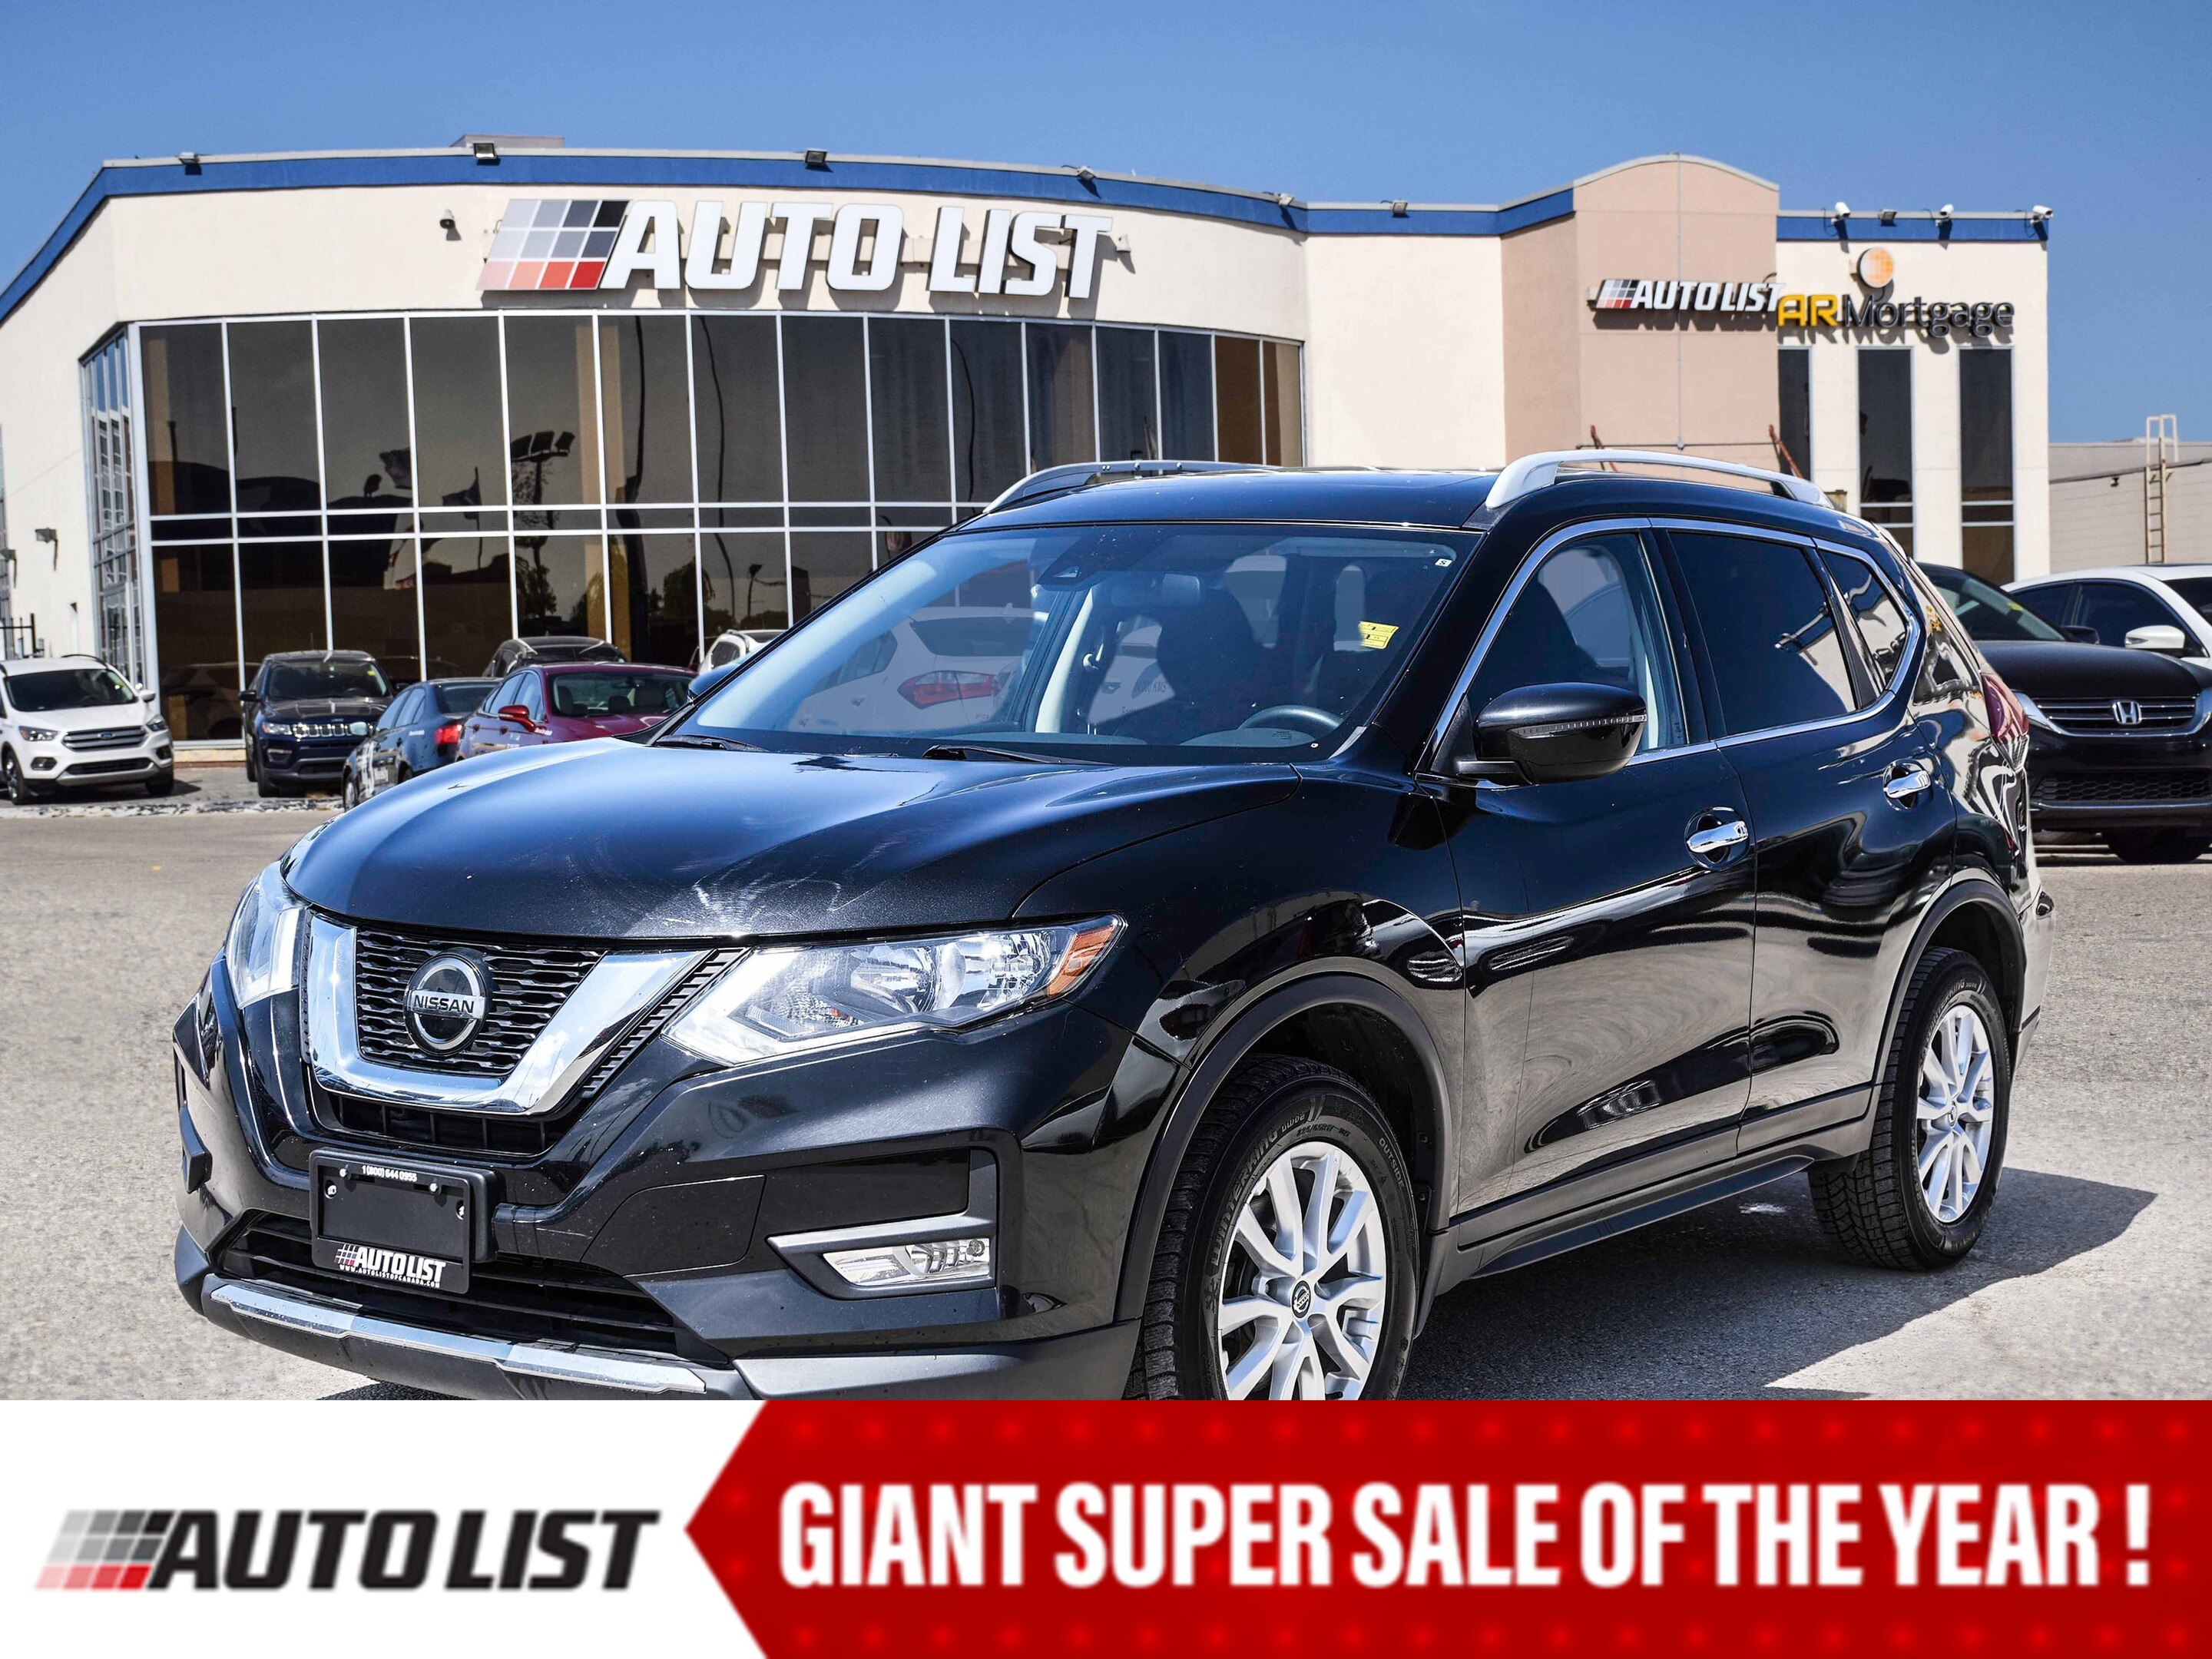 2020 Nissan Rogue SV*AWD*BACK-UP CAMERA*POWER PANOROOF*HEATED SEATS*